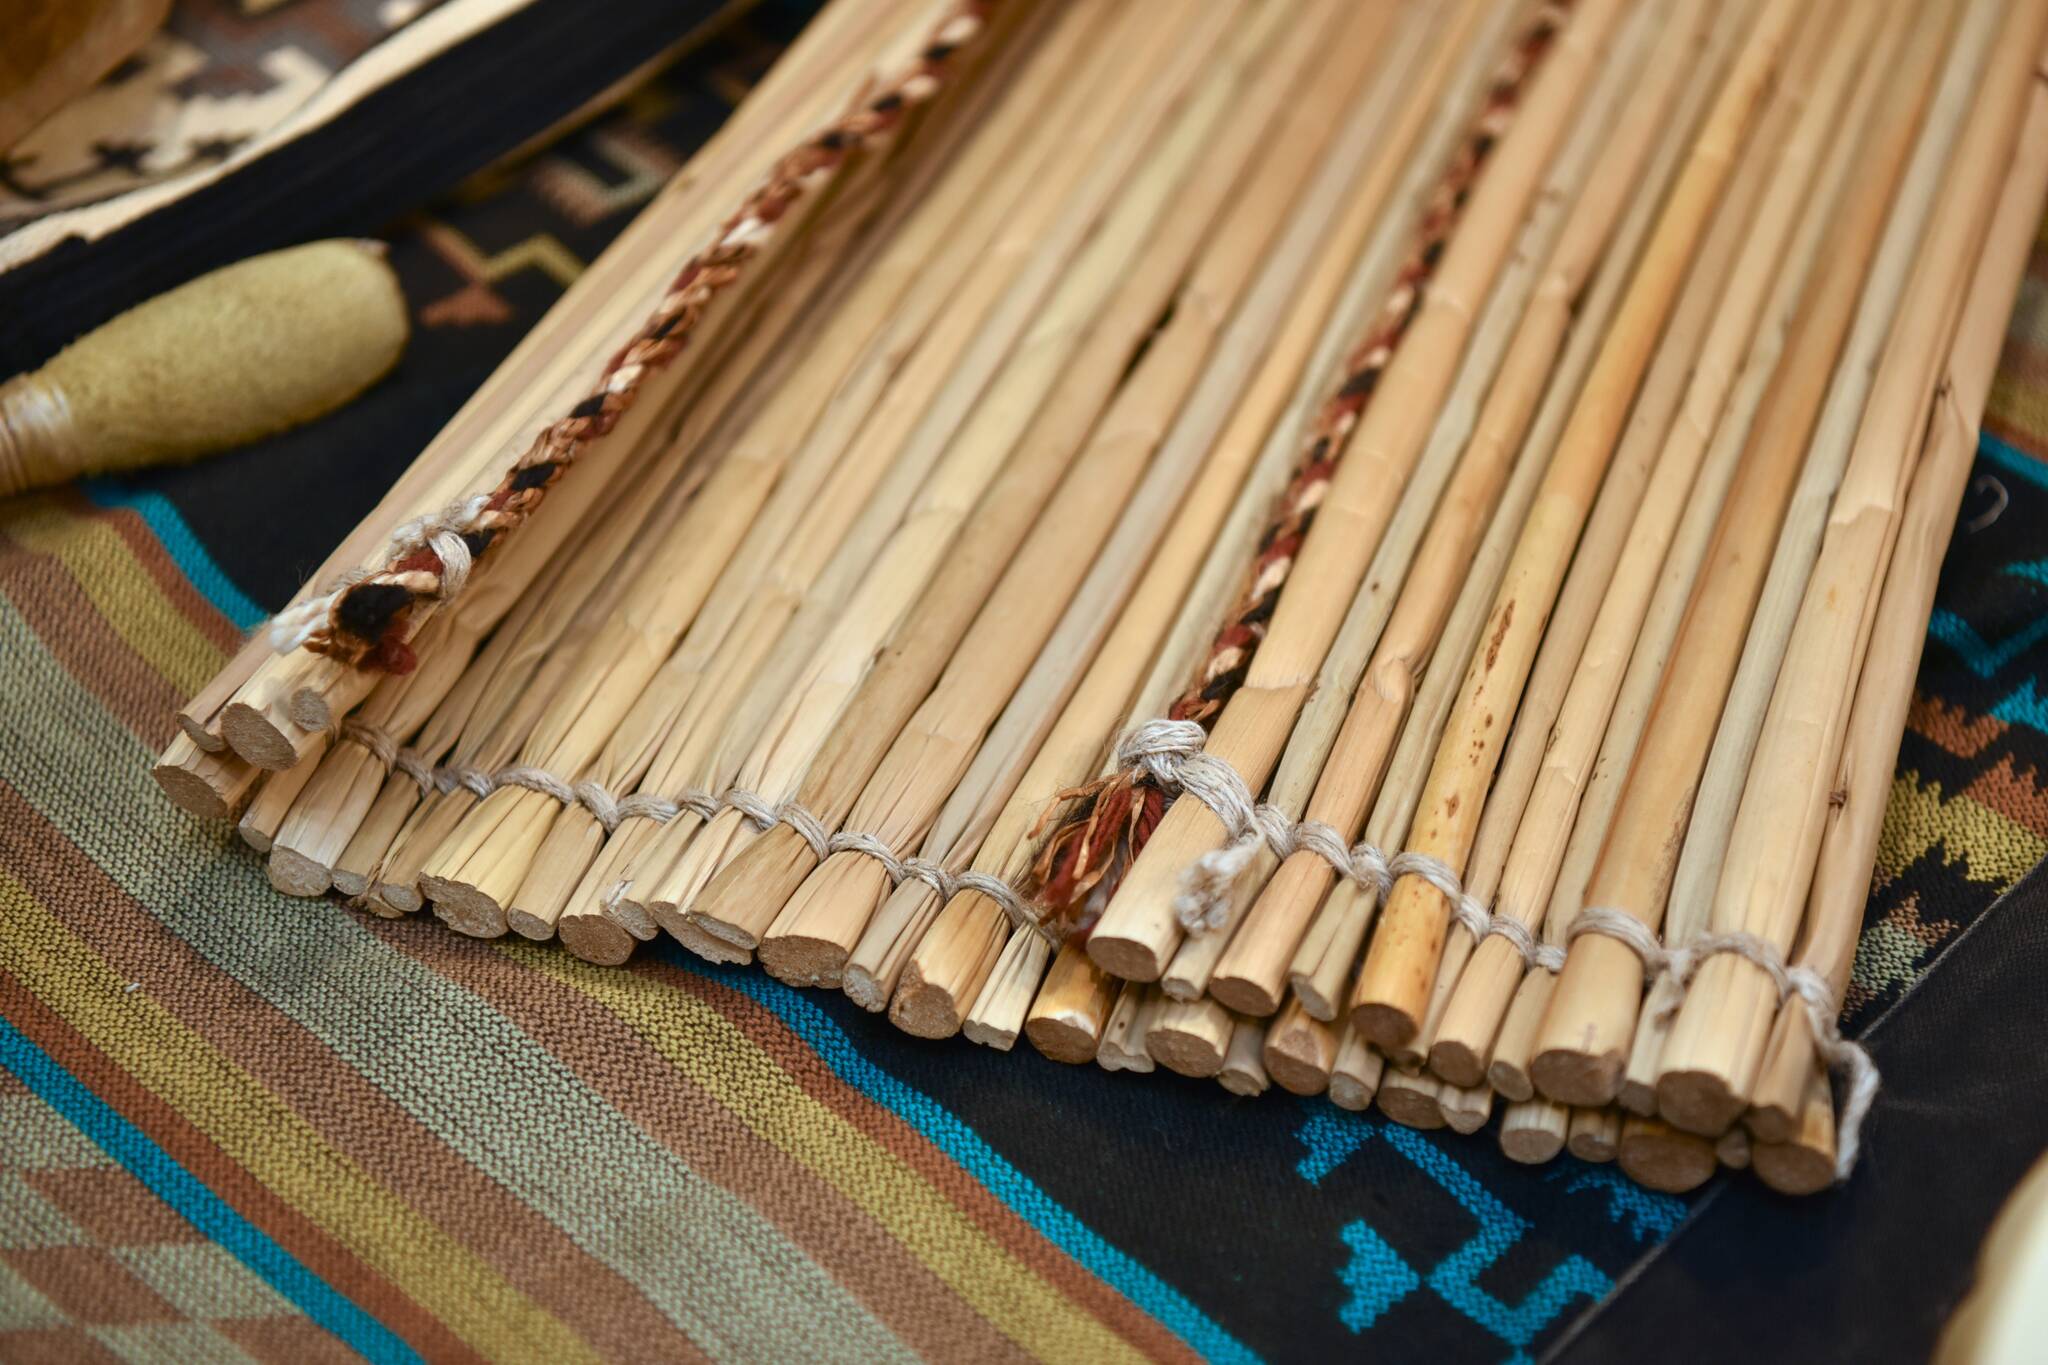 A mat made from tule reeds woven by Ed Carriere.